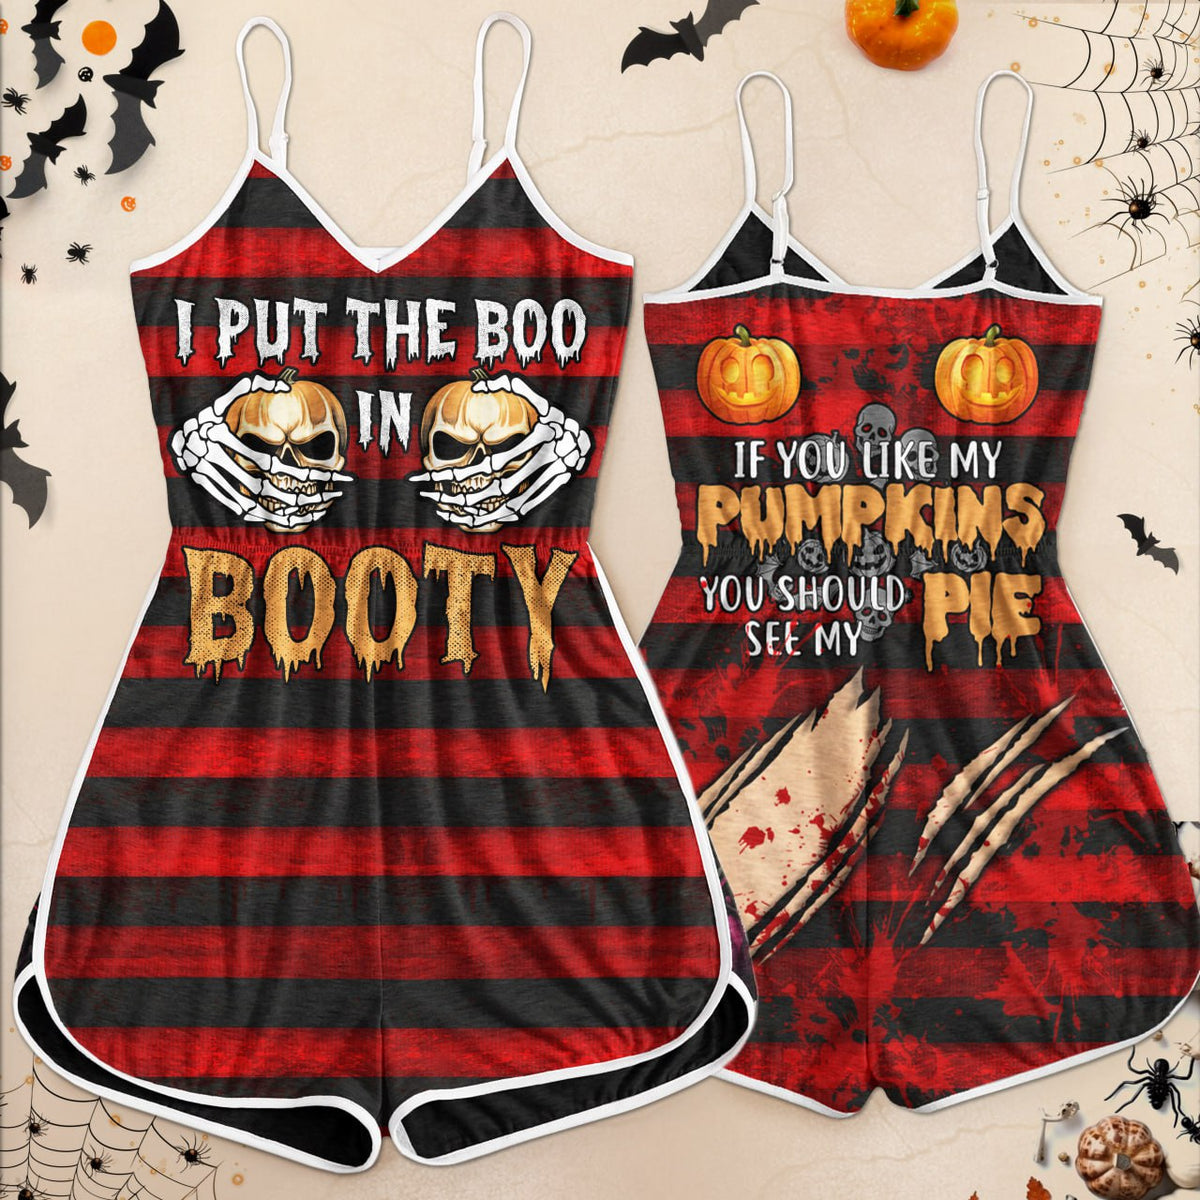 Stylish and Comfy Women's Romper Sleepwear - Stand Out This Halloween